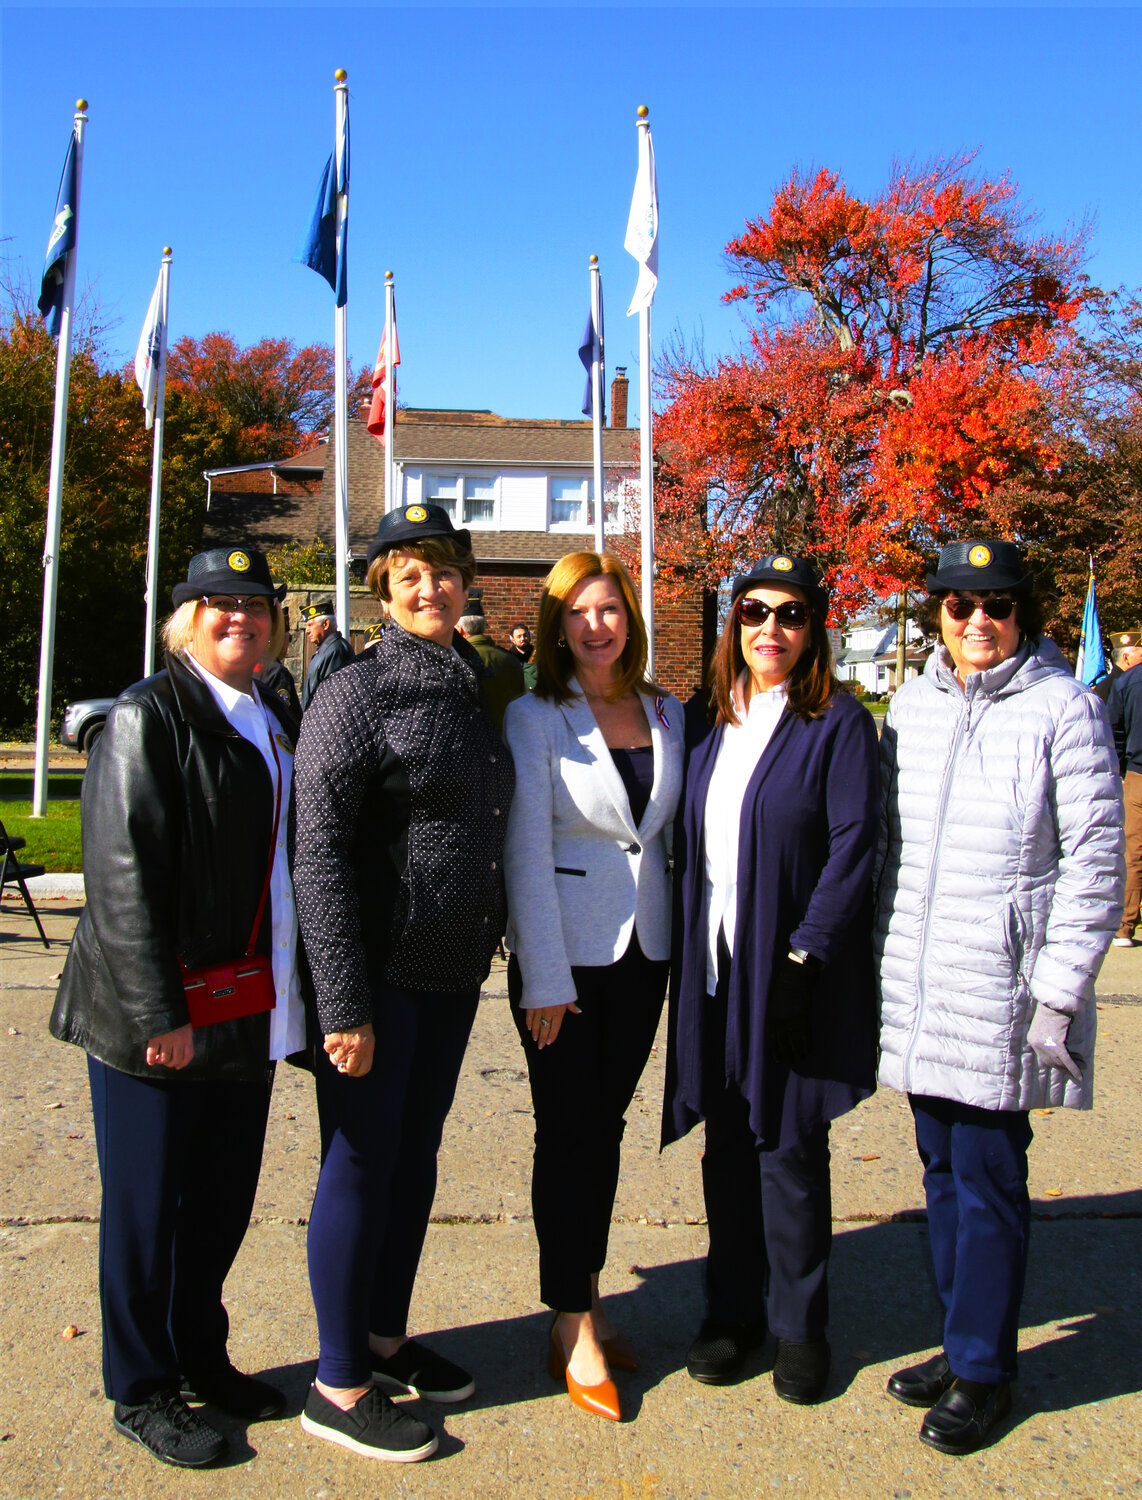 Several members from the Lynbrook Auxiliary Unit 335. Patricia Ryder, far left, Marie Marinaccio, Town of Hempstead Councilwoman Laura Ryder, Debra Hunt, and Marie Brignati